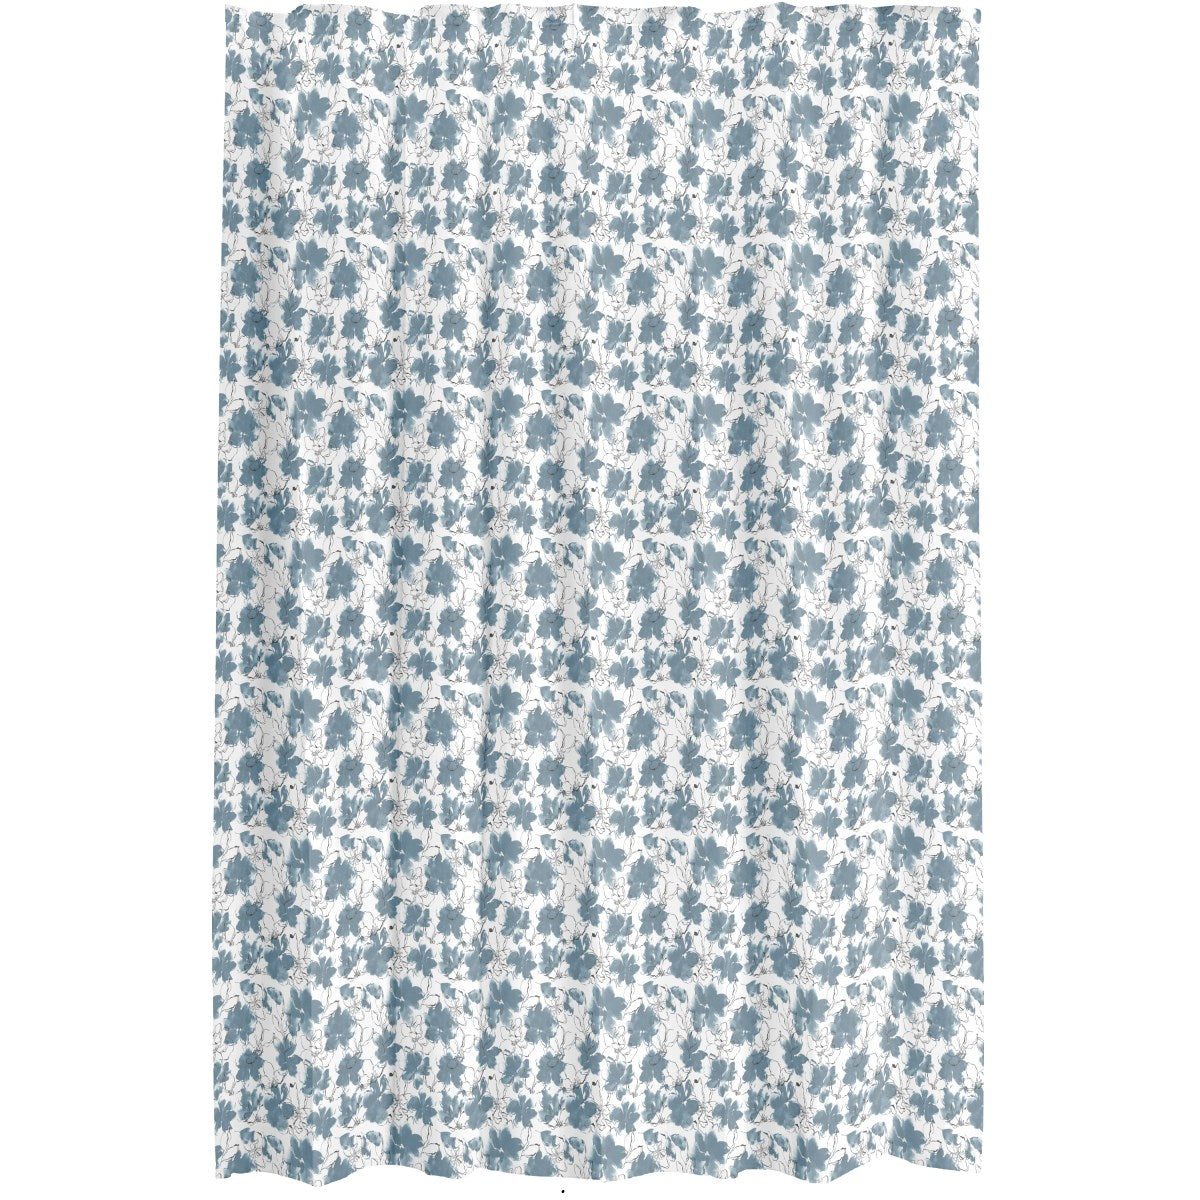 Blues in Bloom Shower Curtain